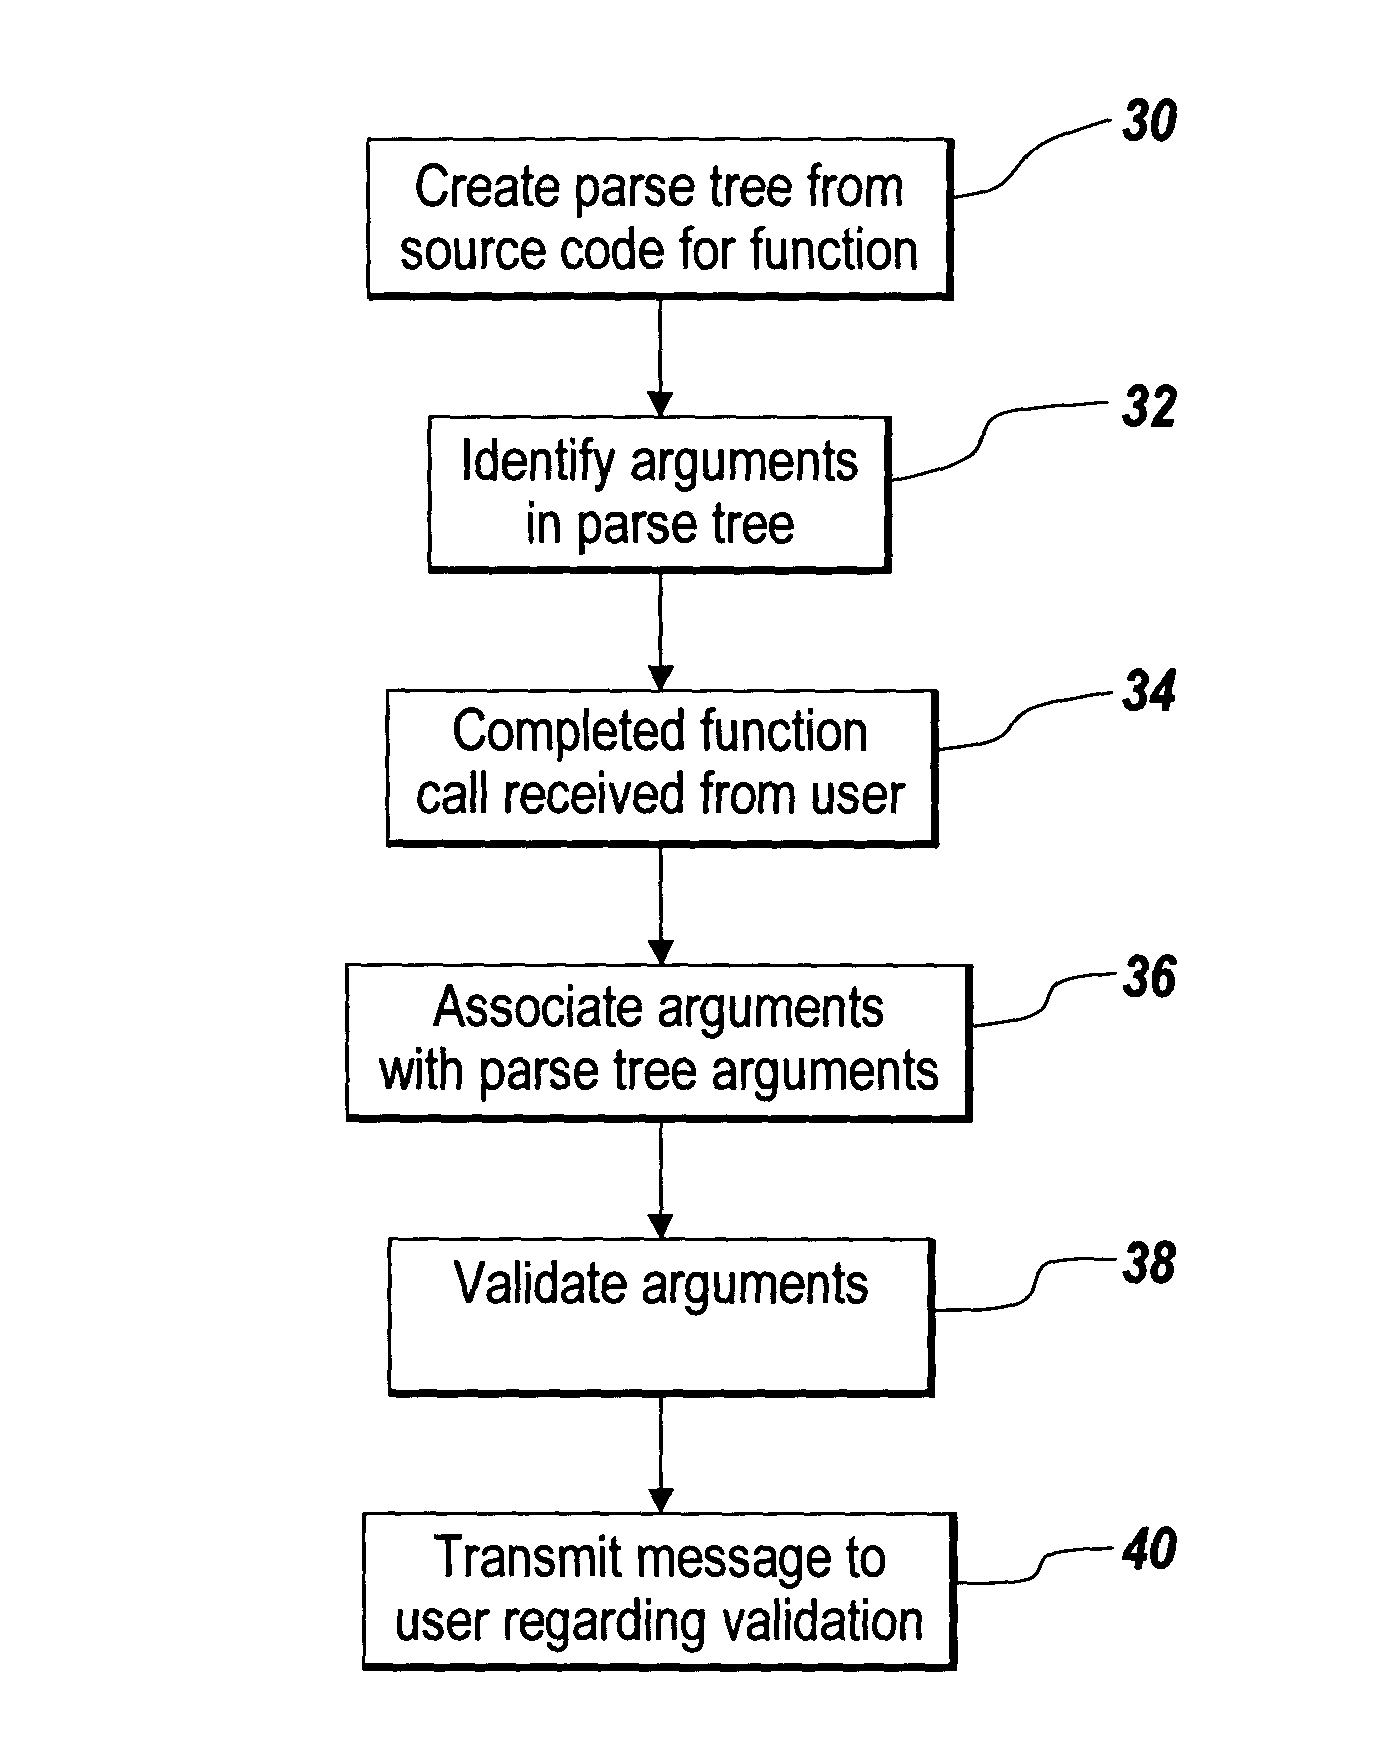 Method of providing interactive usage descriptions based on source code analysis